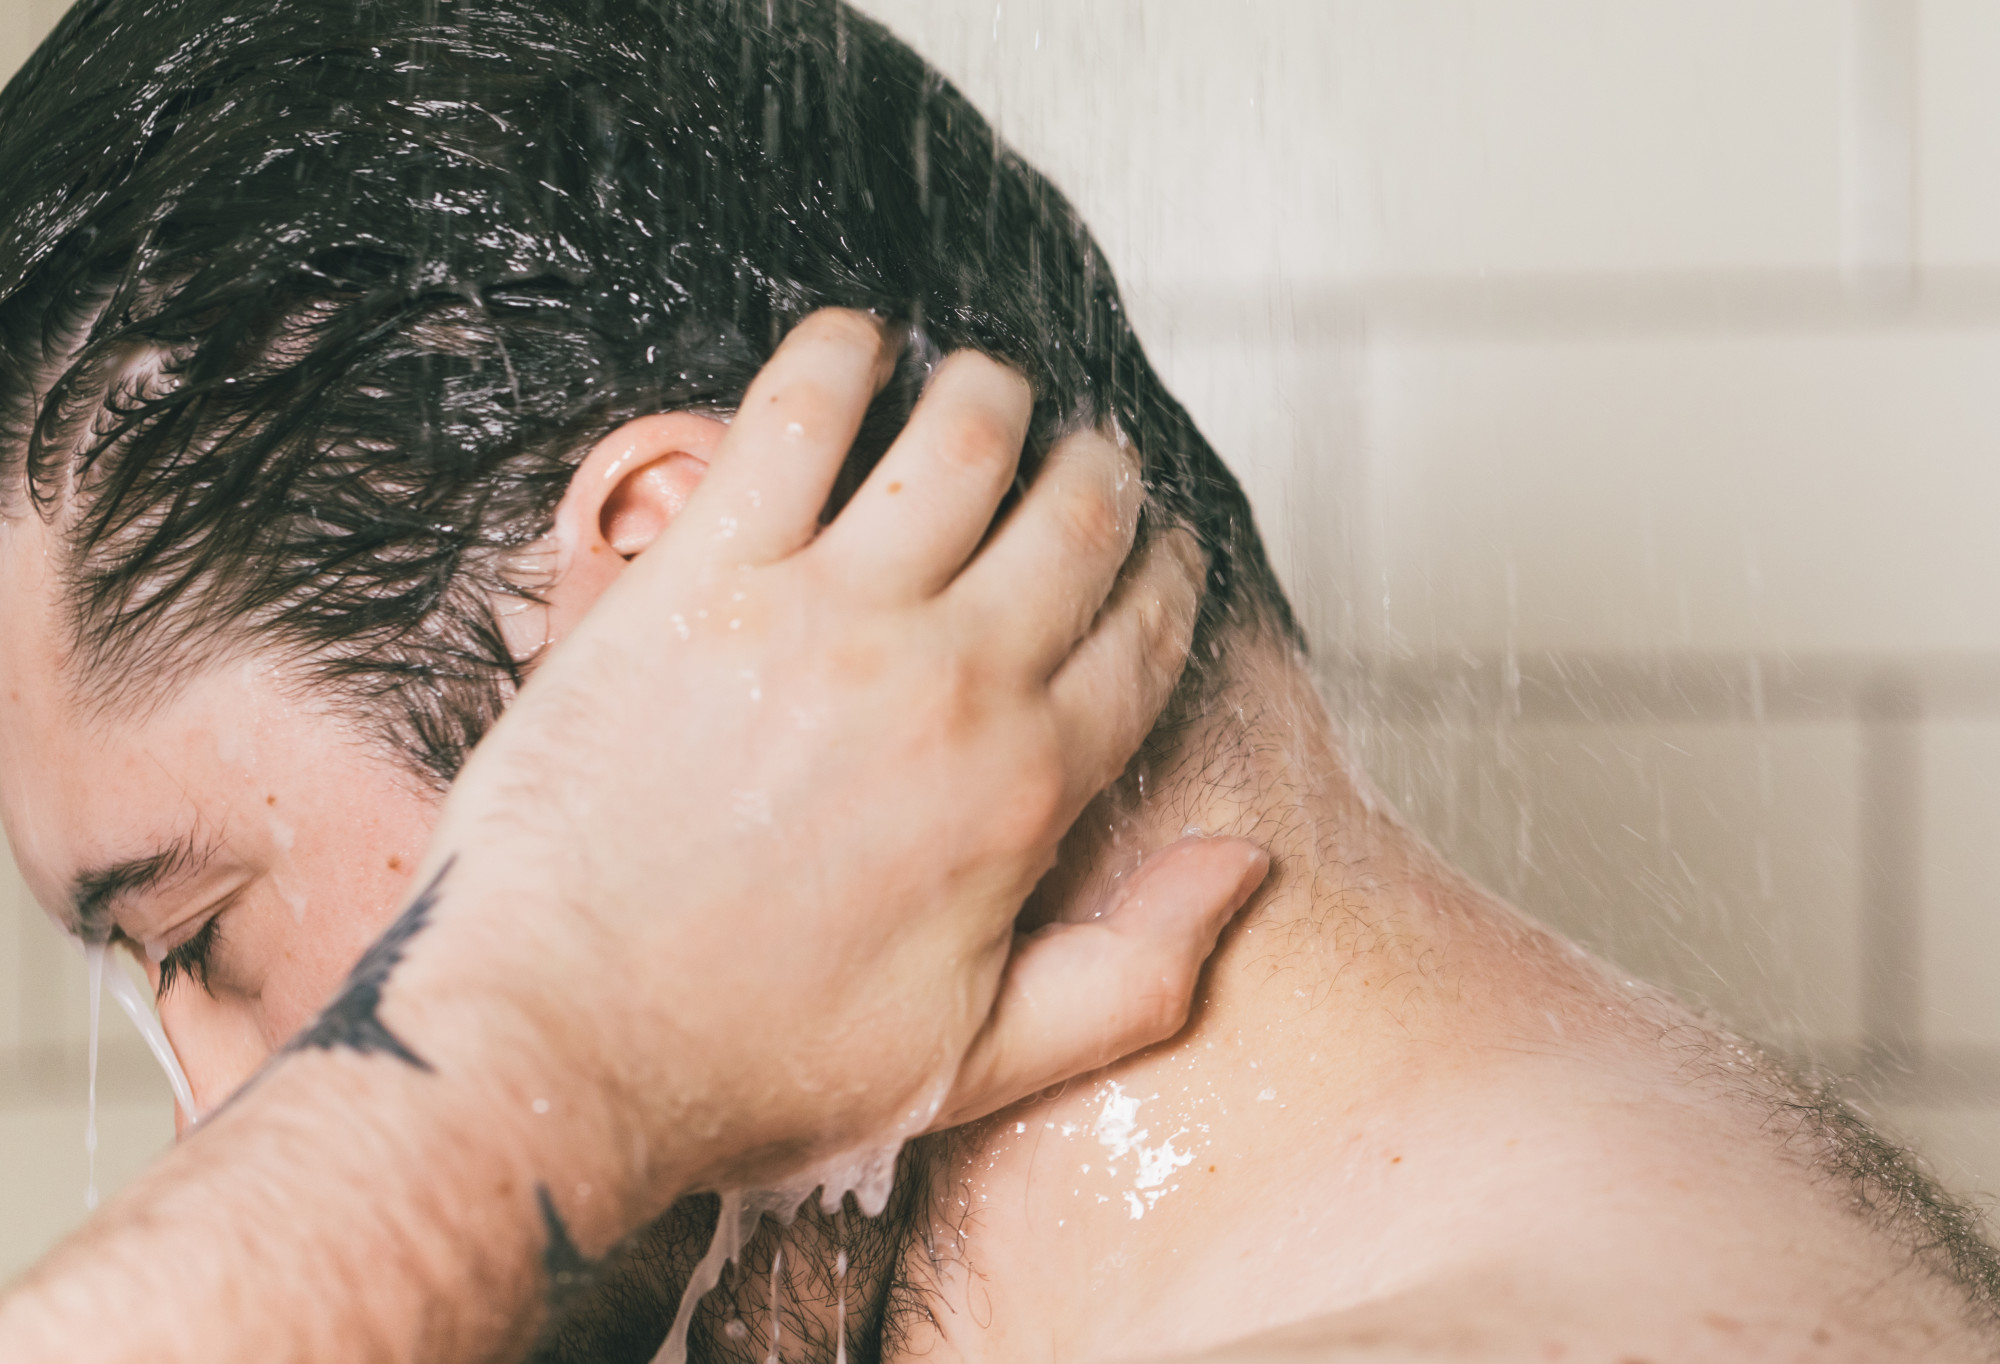 A person with short, dark hair and tatoos rinses conditioner out of their hair, creating a milky run-off of water.